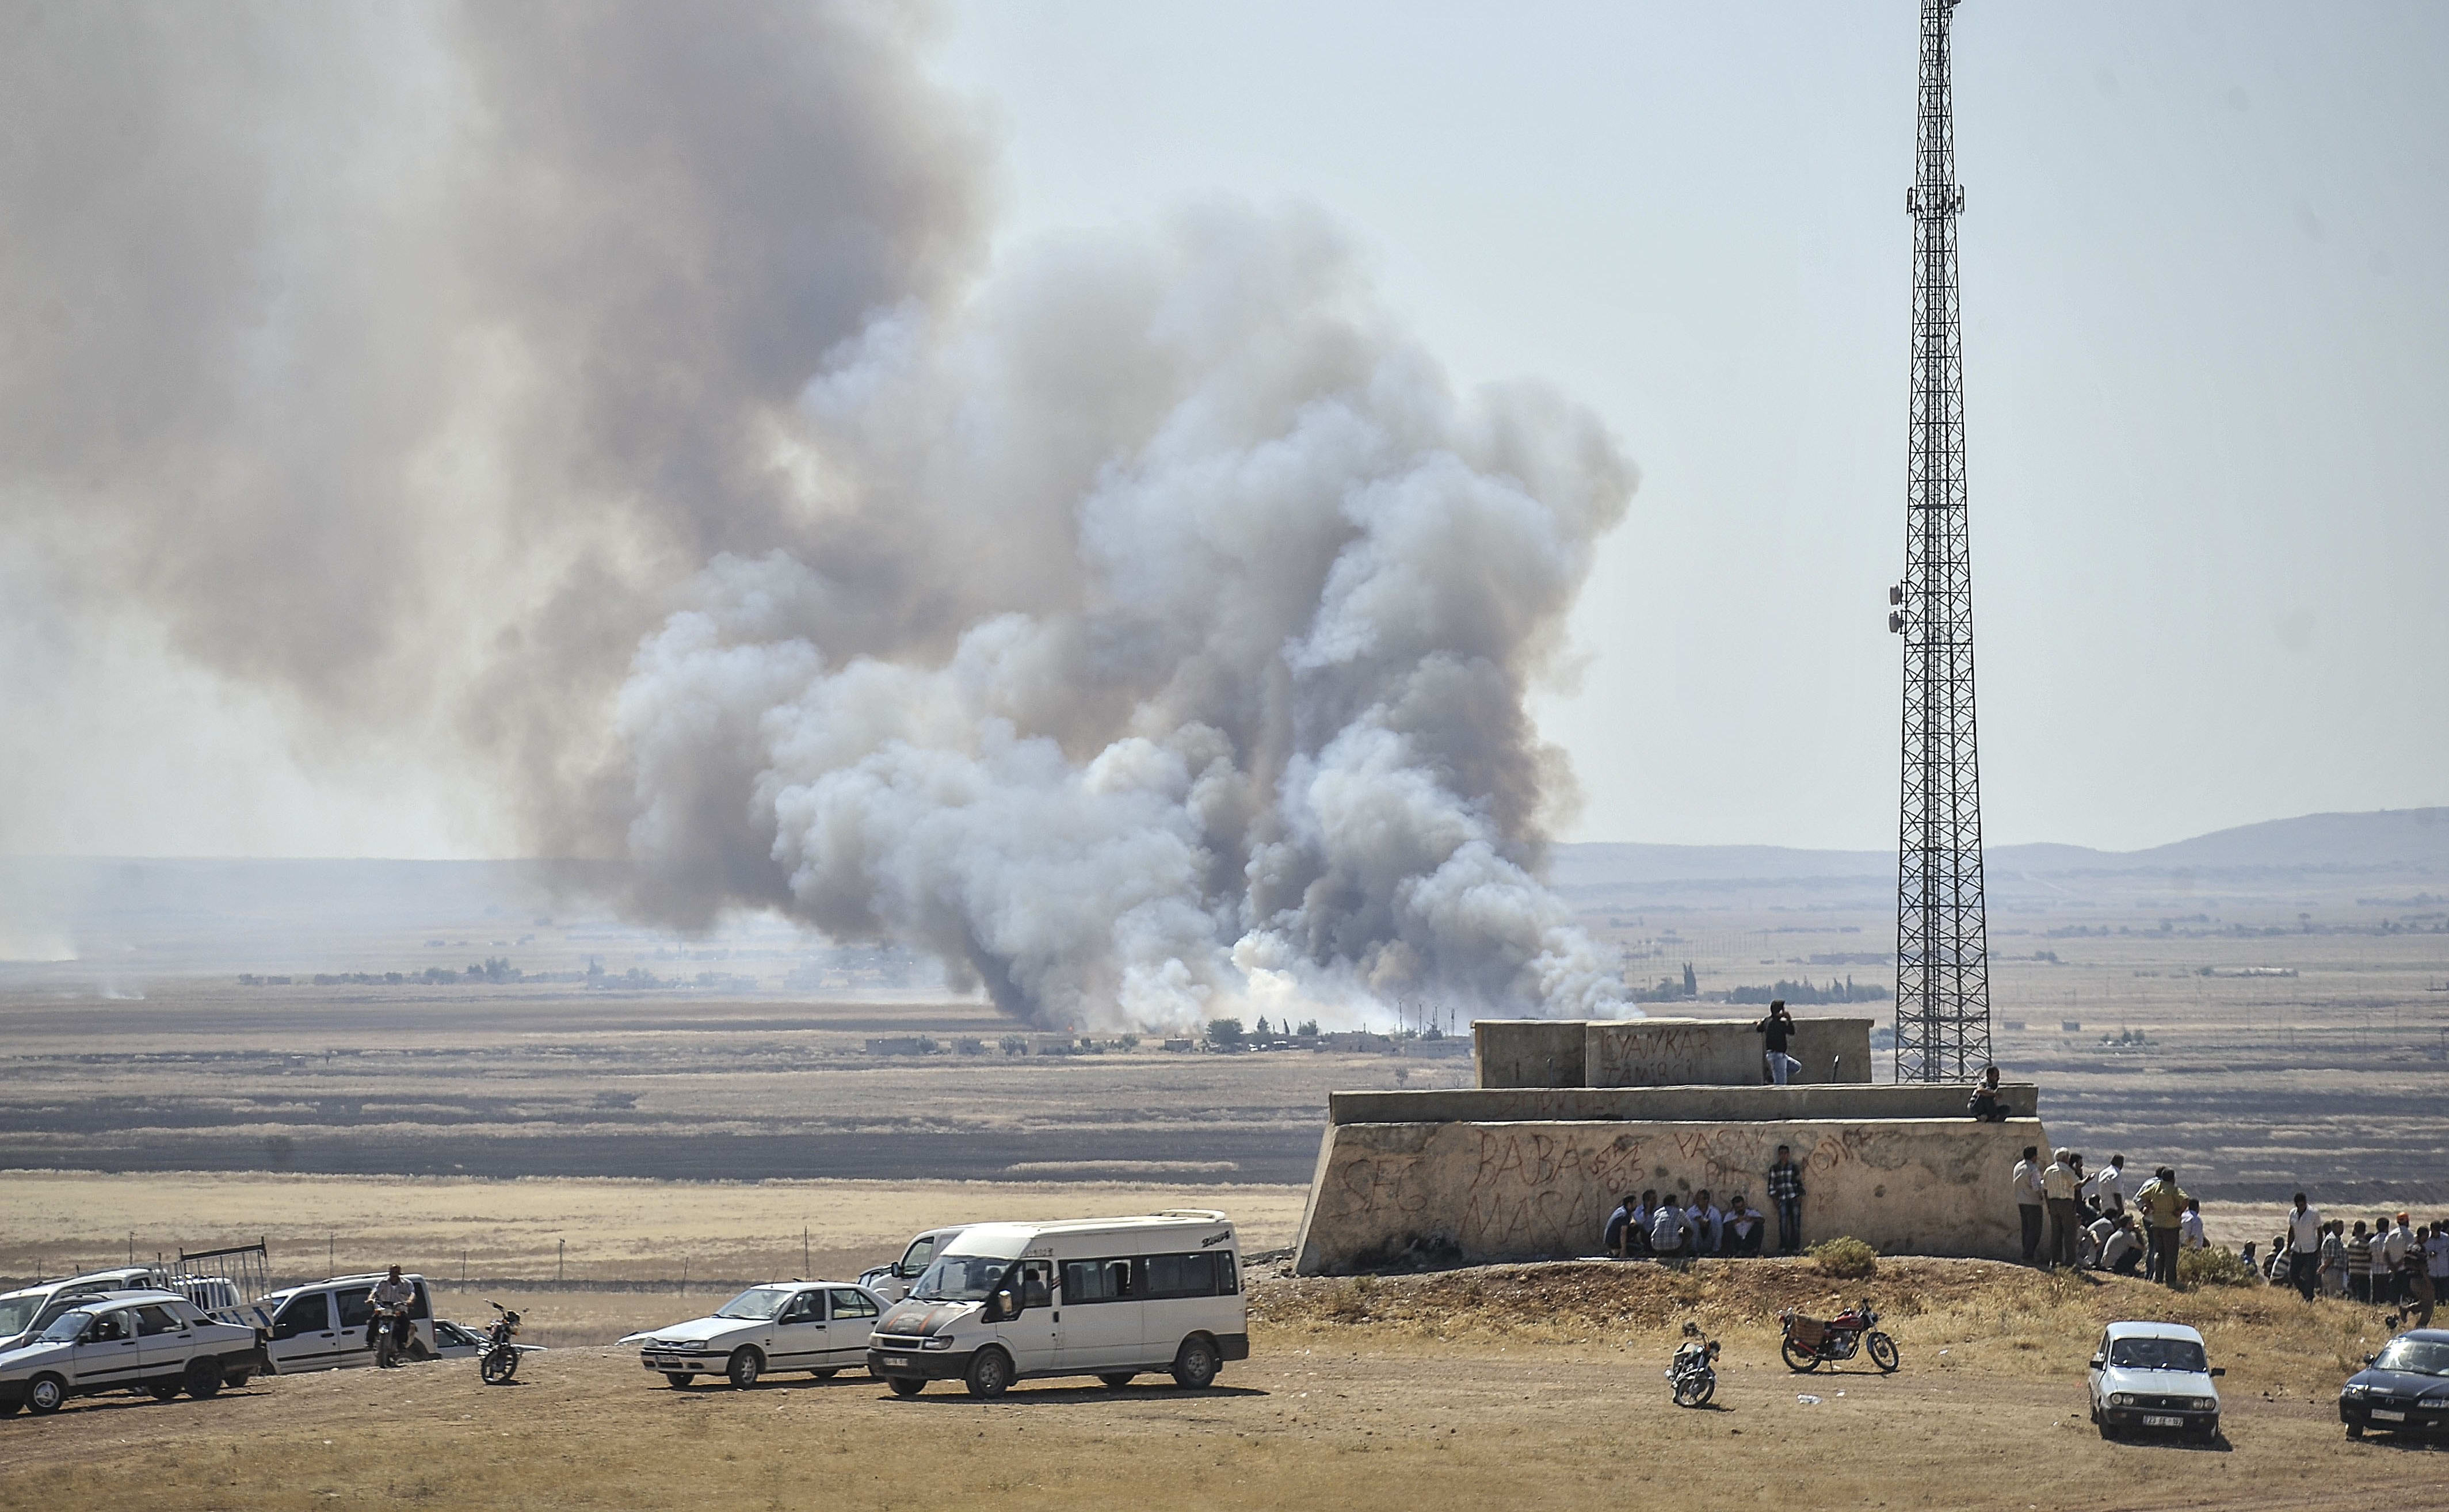 Smoke rises as Islamic State fighters and Kurdish armed groups clash in the Syria-Turkey border town of Kobane on 26 June.